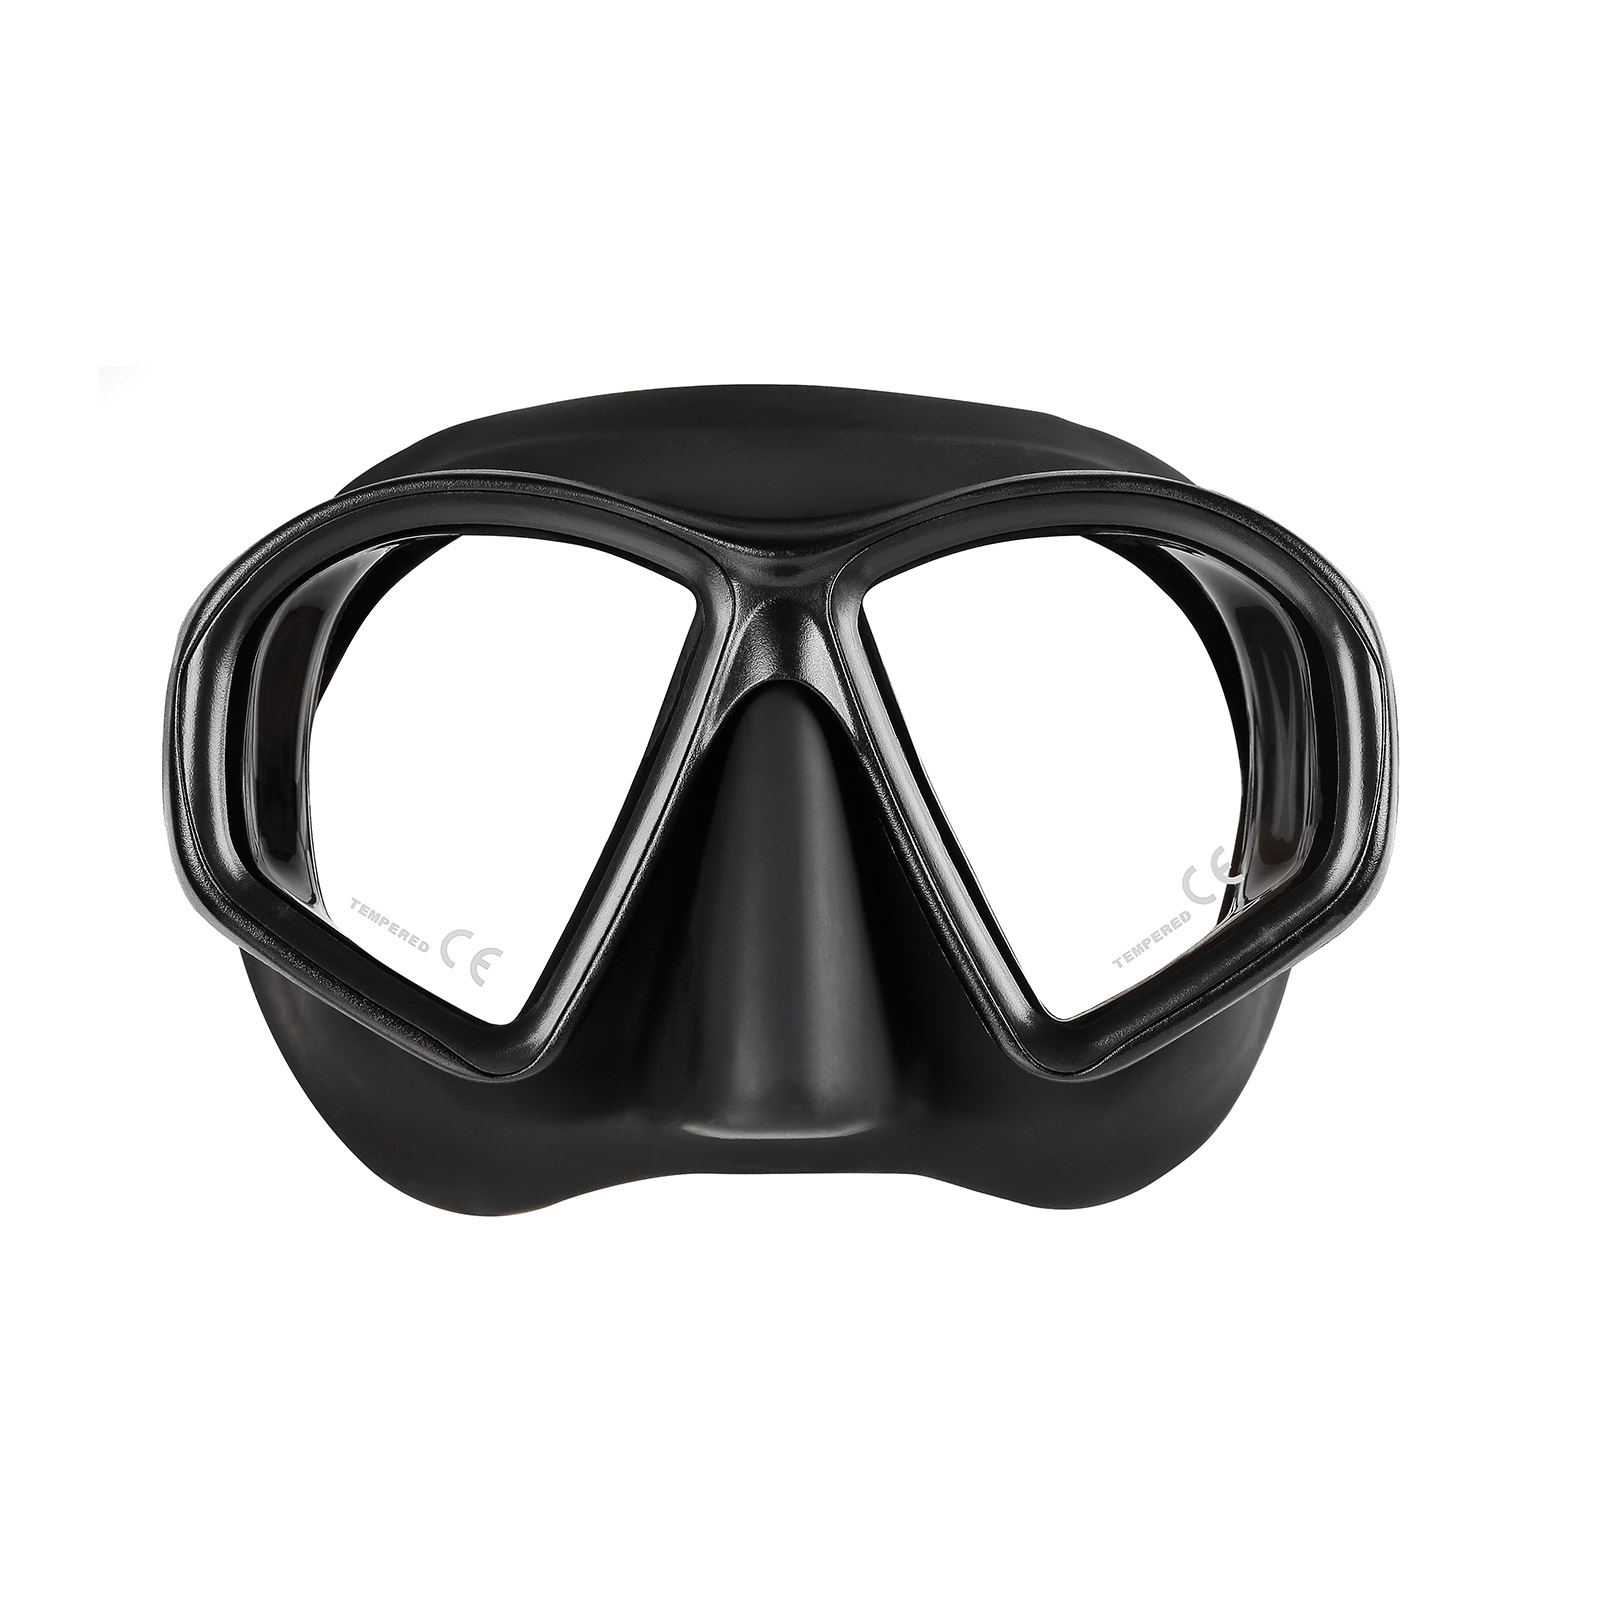 Mares Sealhouette SF Mask